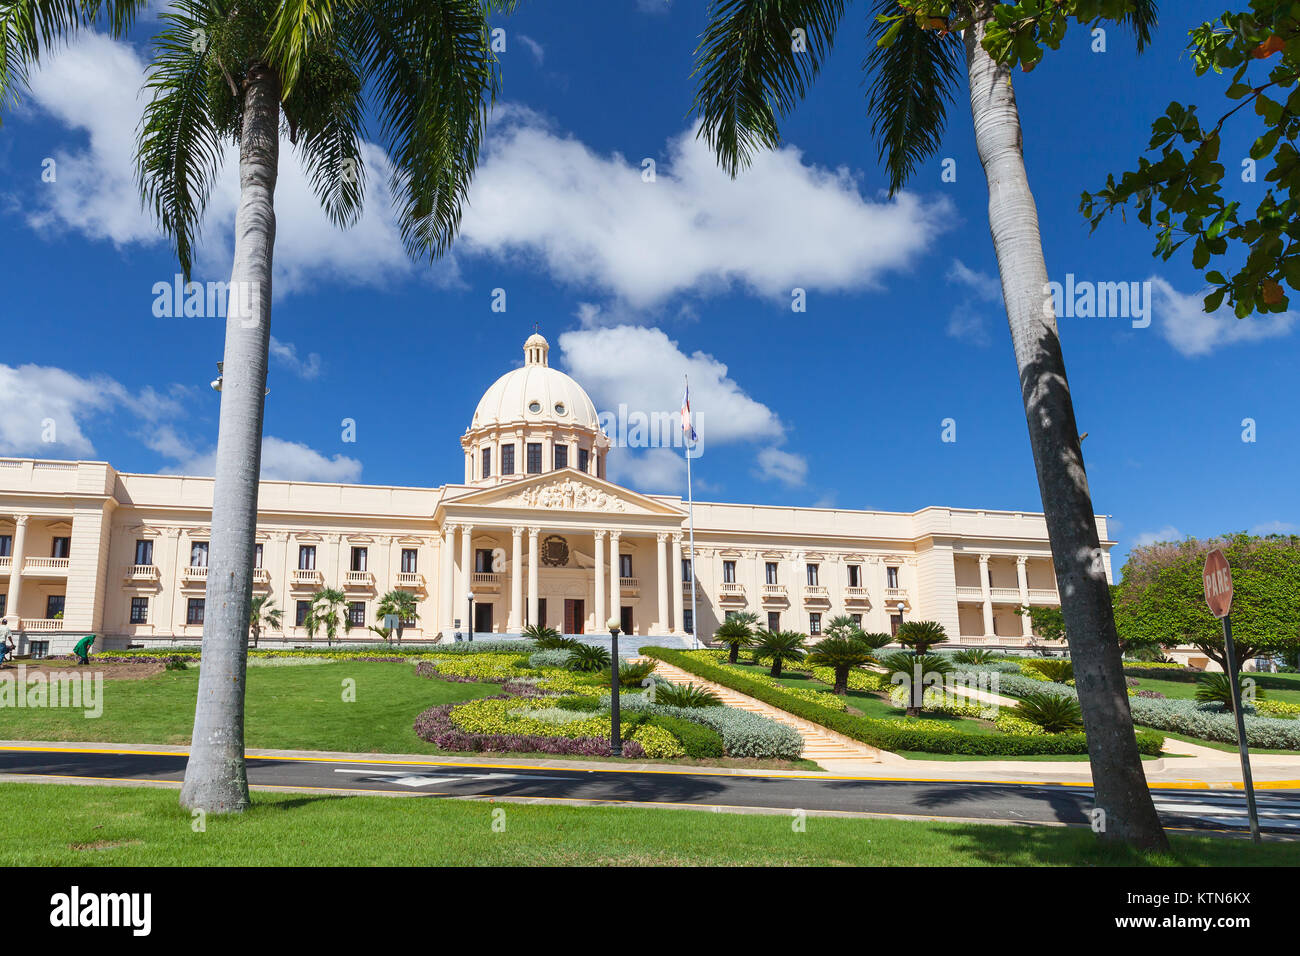 The National Palace, Santo Domingo, capital of Dominican Republic Stock Photo